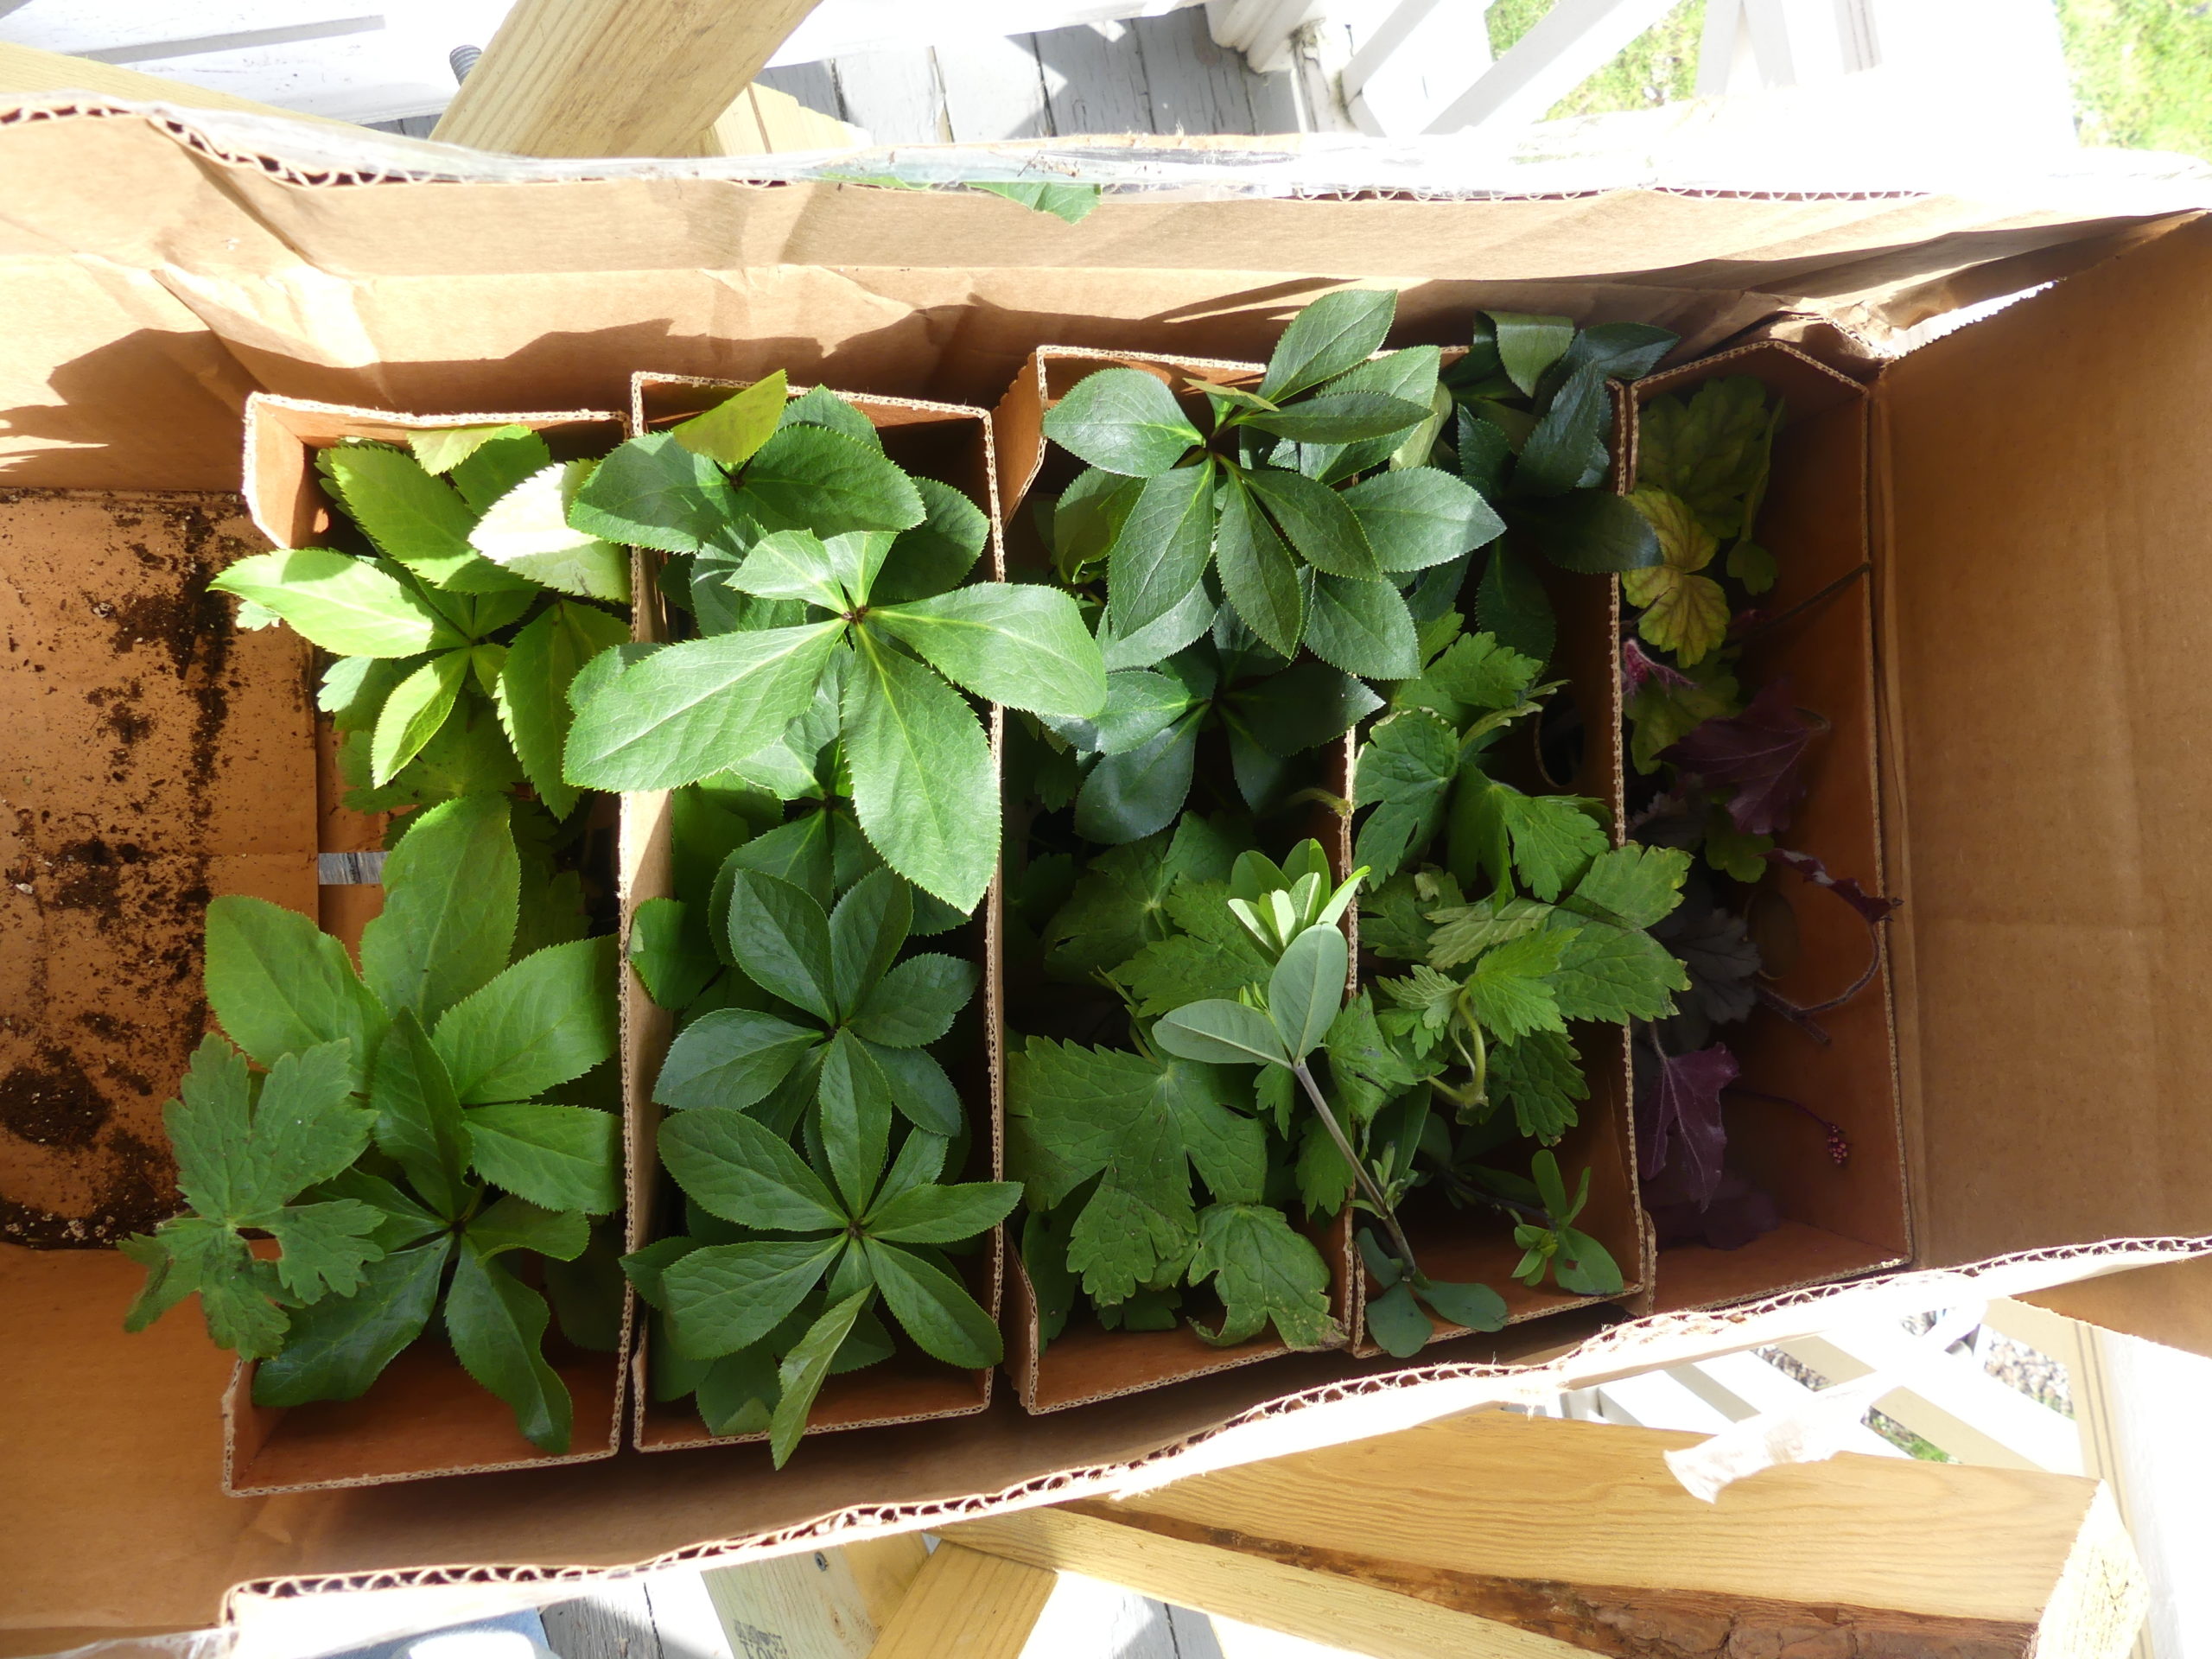 An unboxing of plants received from Bluestone Perennials. This box contains Heucheras and hellebores. As many as 24 coir pots can fit in a box, 4 in a cardboard sleeve that’s then put into a shipping box. There is little to no soil loss and the plants always look great on arrival.